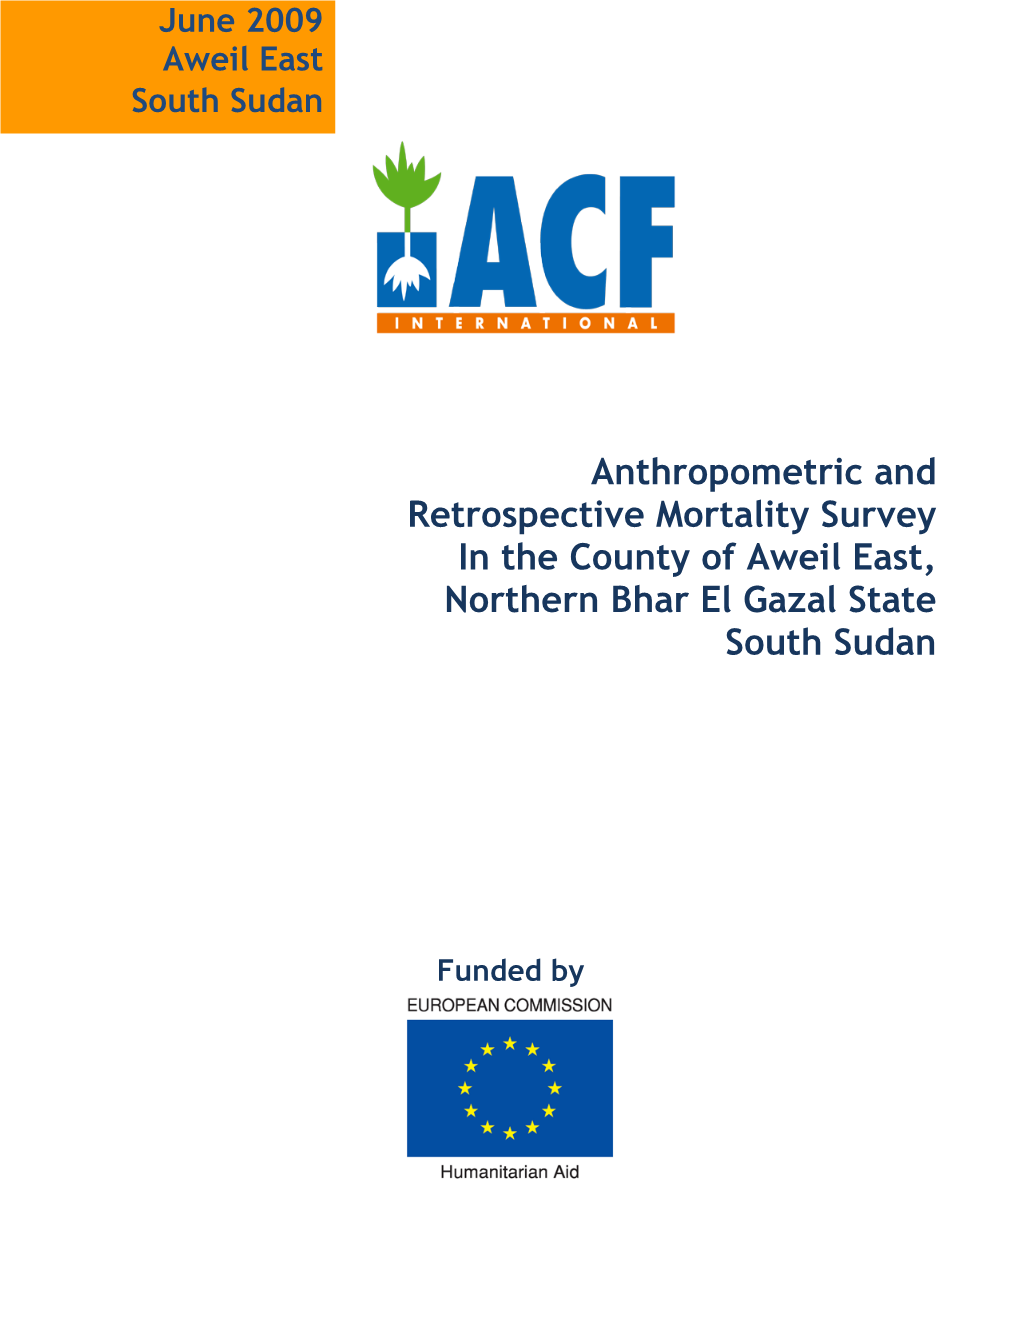 Anthropometric and Retrospective Mortality Survey in the County of Aweil East, Northern Bhar El Gazal State South Sudan